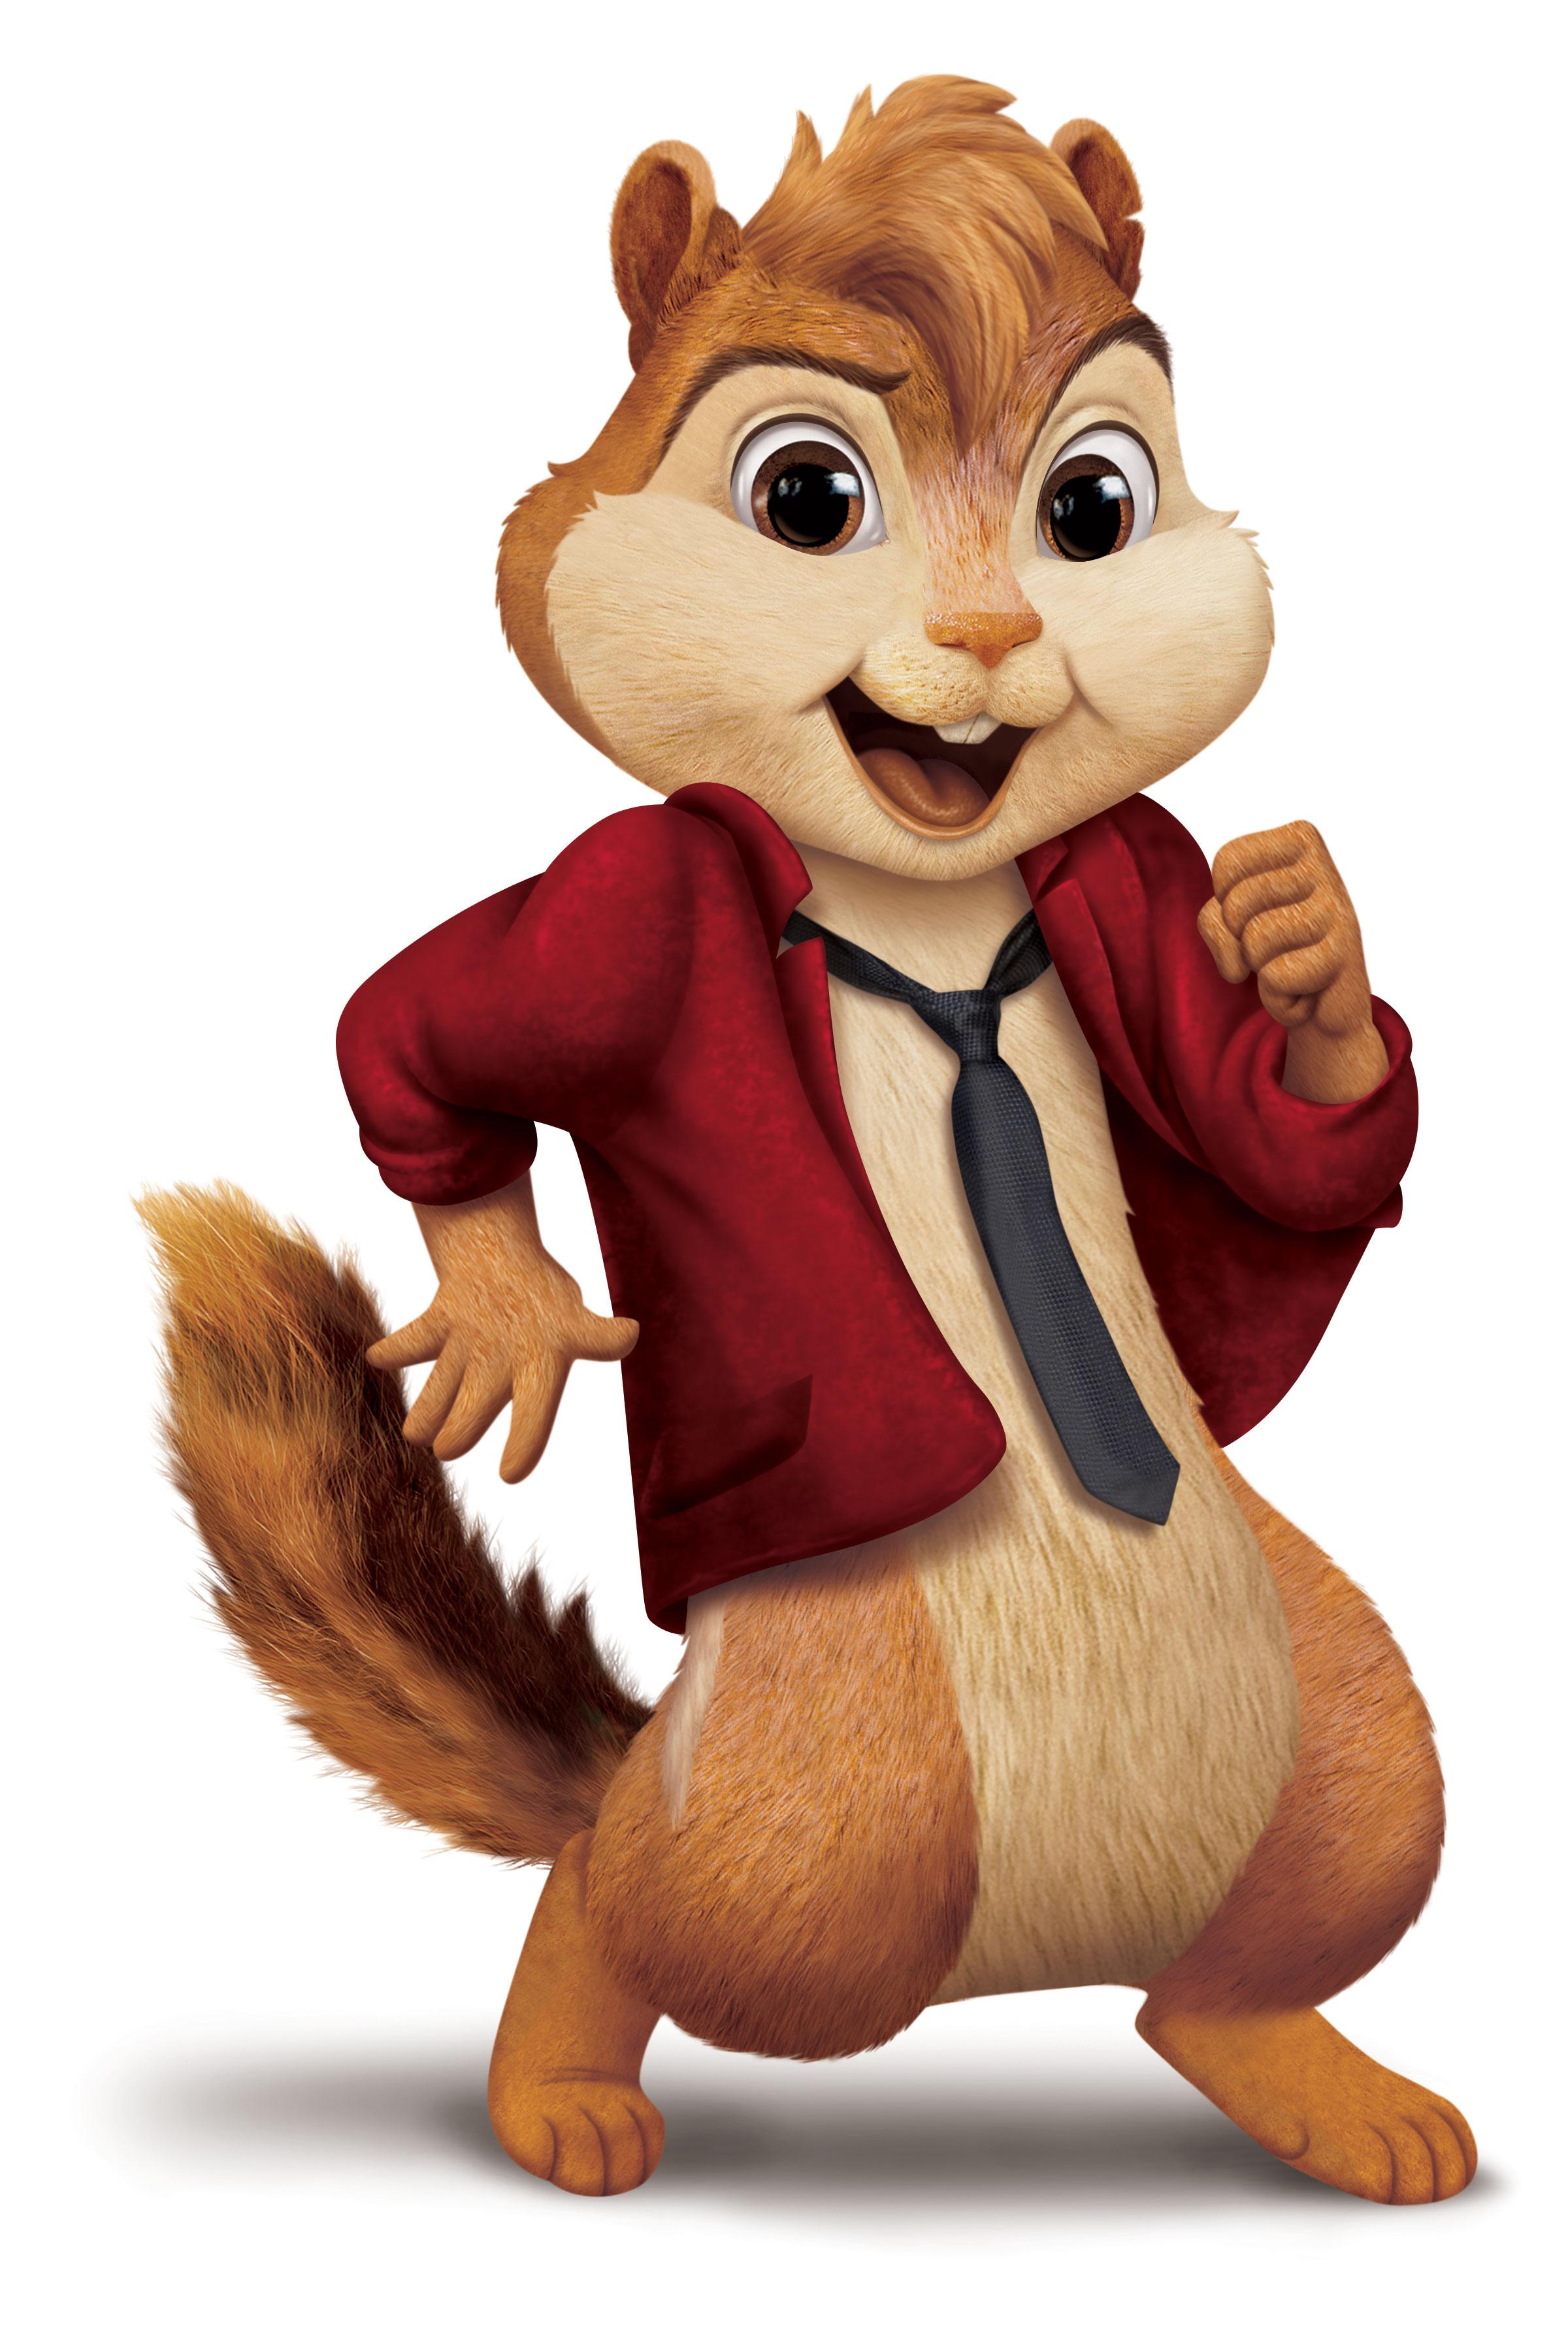 Alvin And The Chipmunks Wallpapers High Quality.